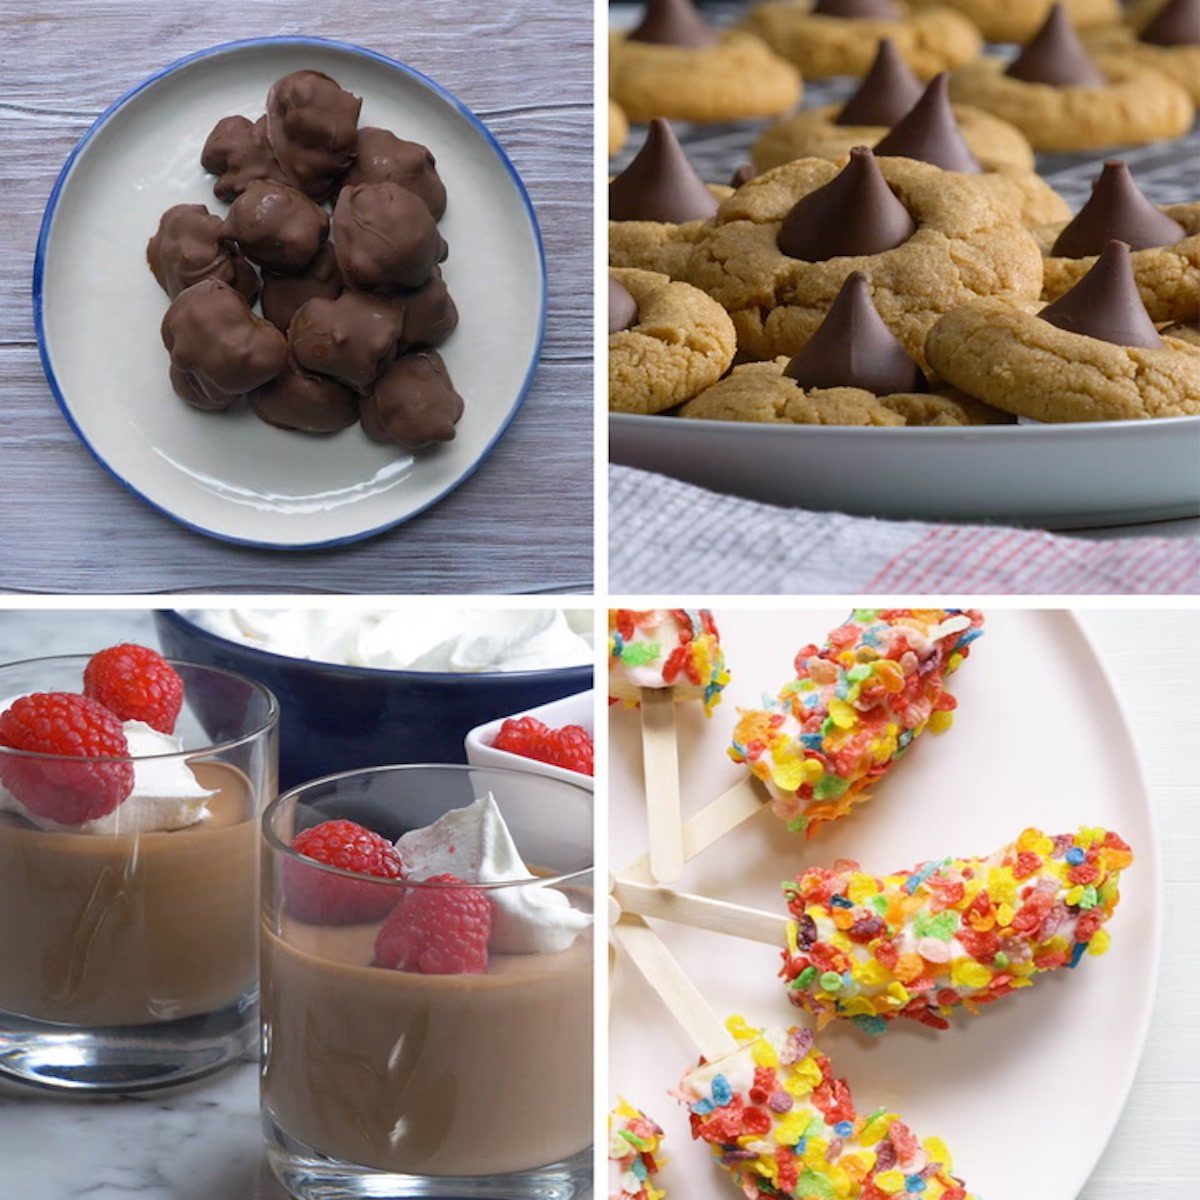 90 Easy Dessert Recipes With 5 Ingredients (Or Less!)